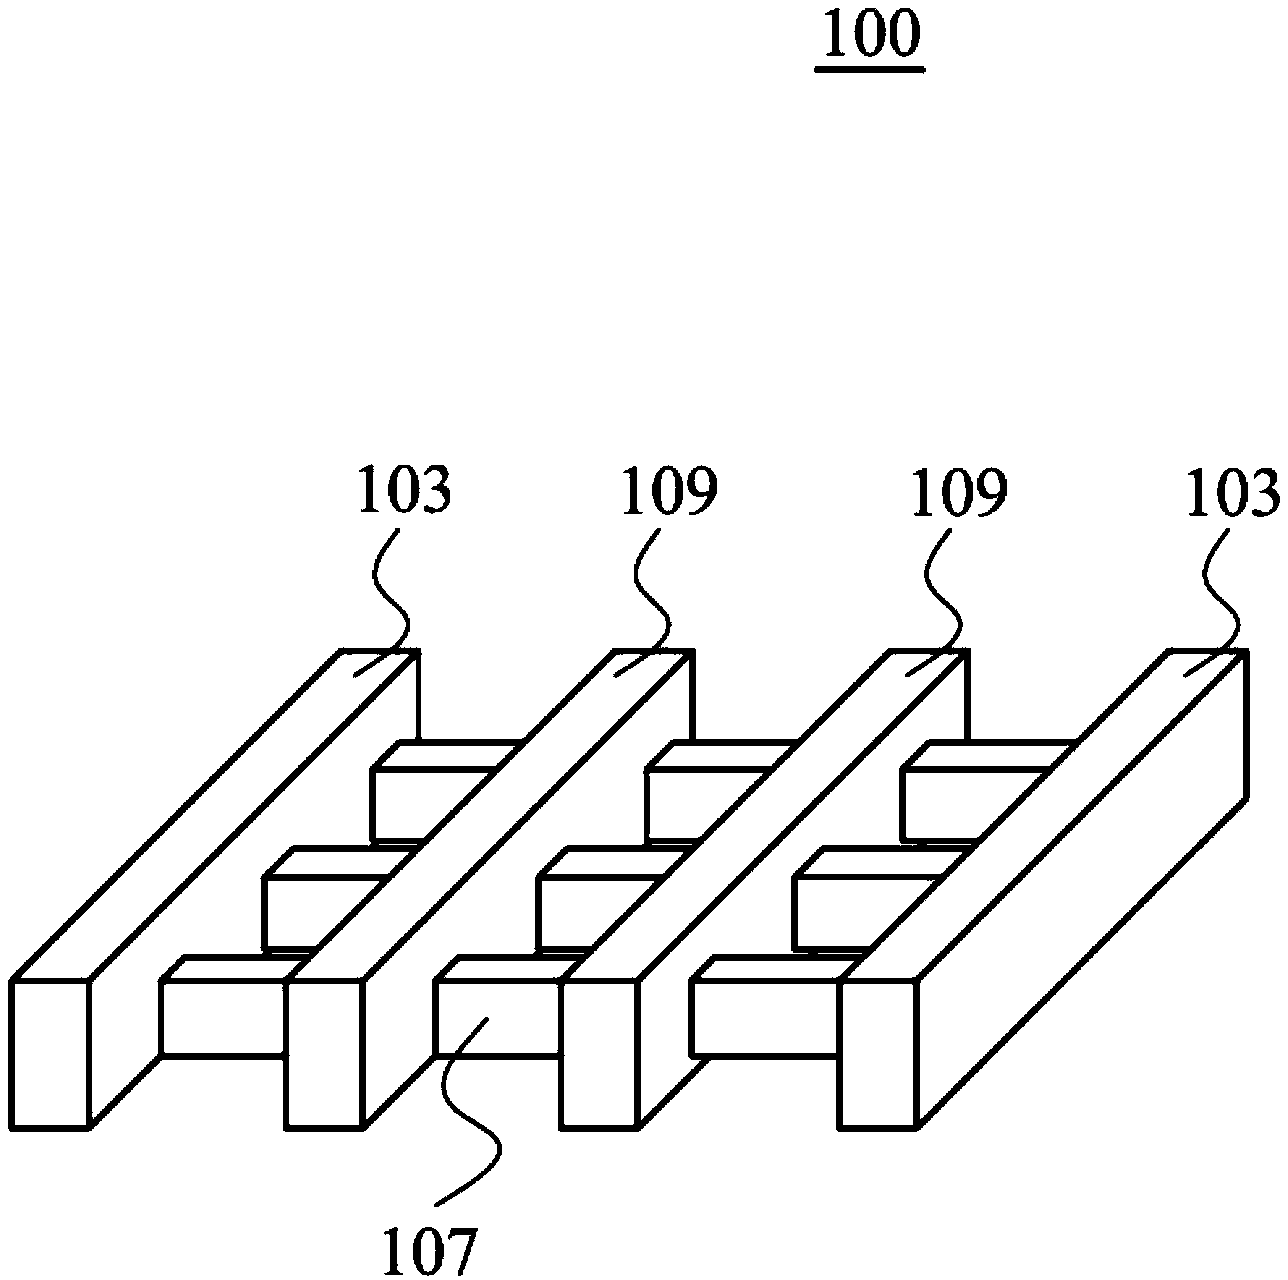 Layout verification method used for polysilicon cell edge structure in FinFET standard cells